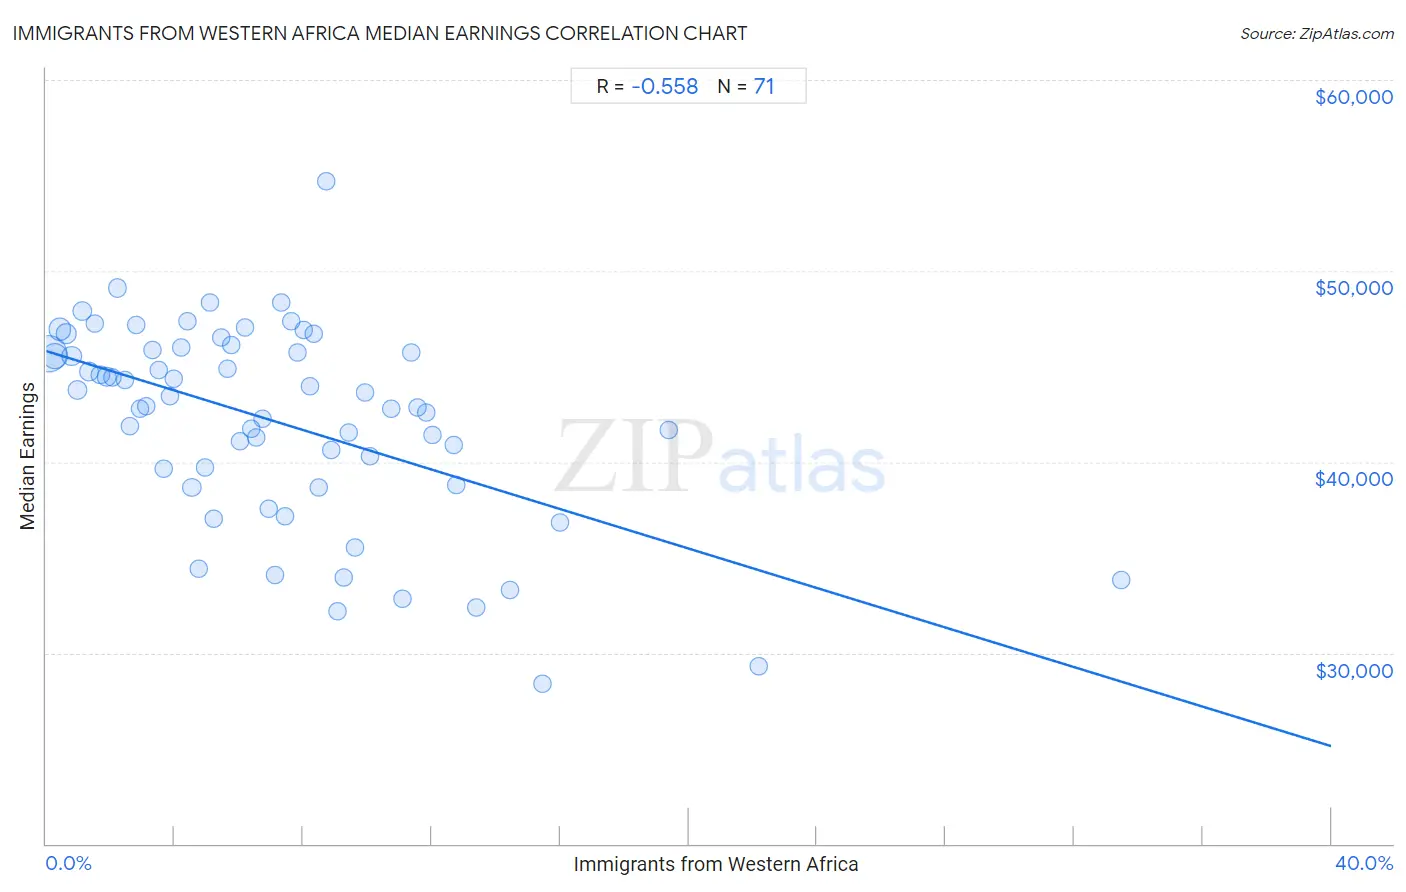 Immigrants from Western Africa Median Earnings